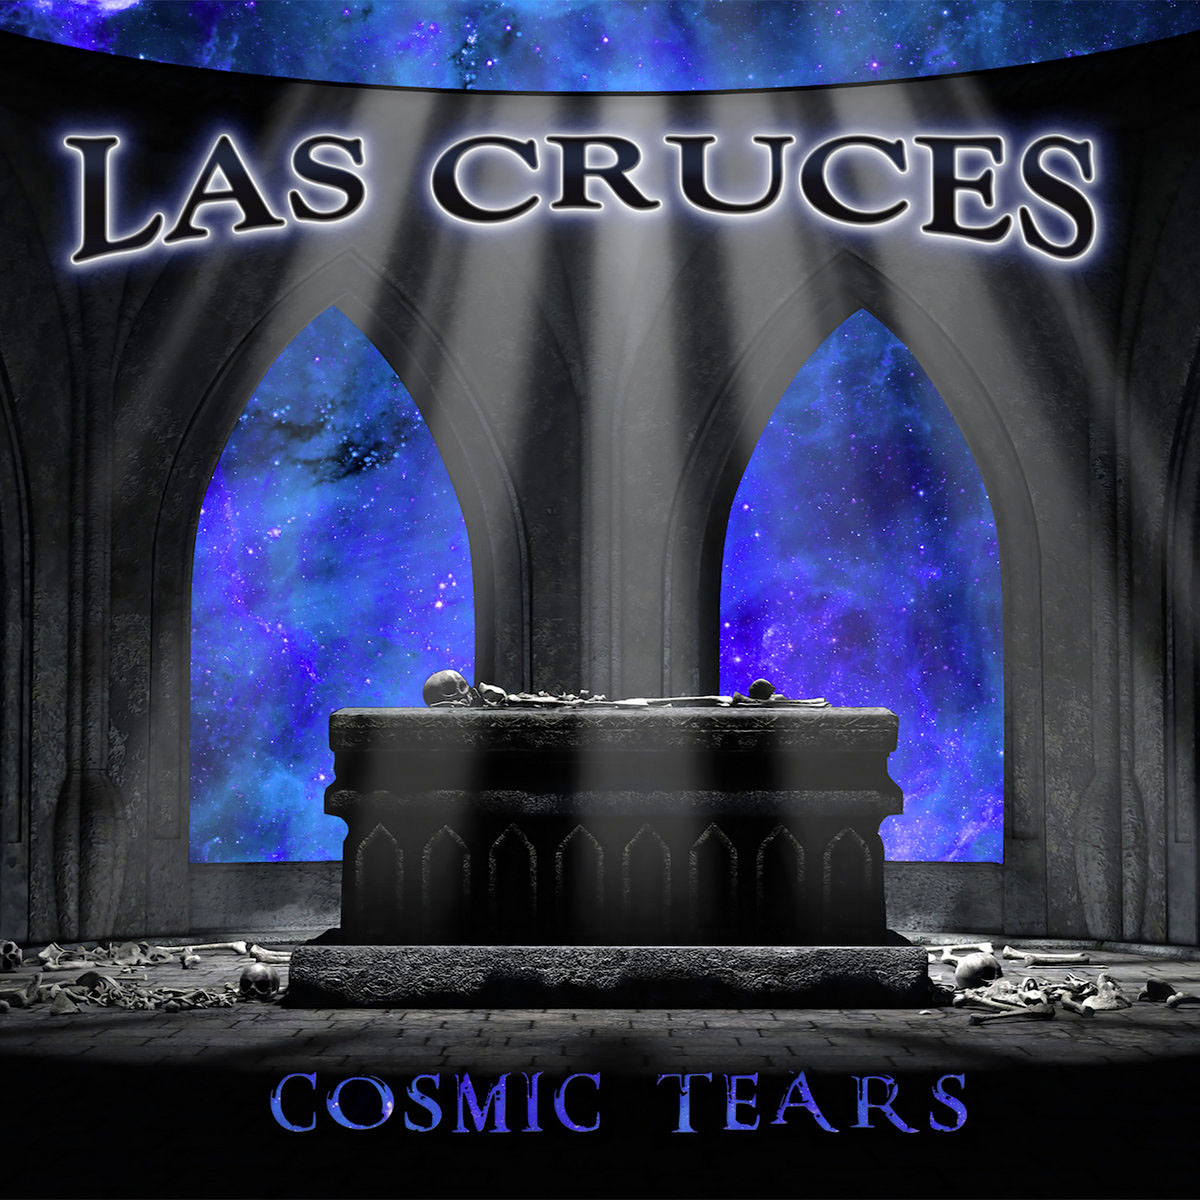 Cosmic Tears by Las Cruces